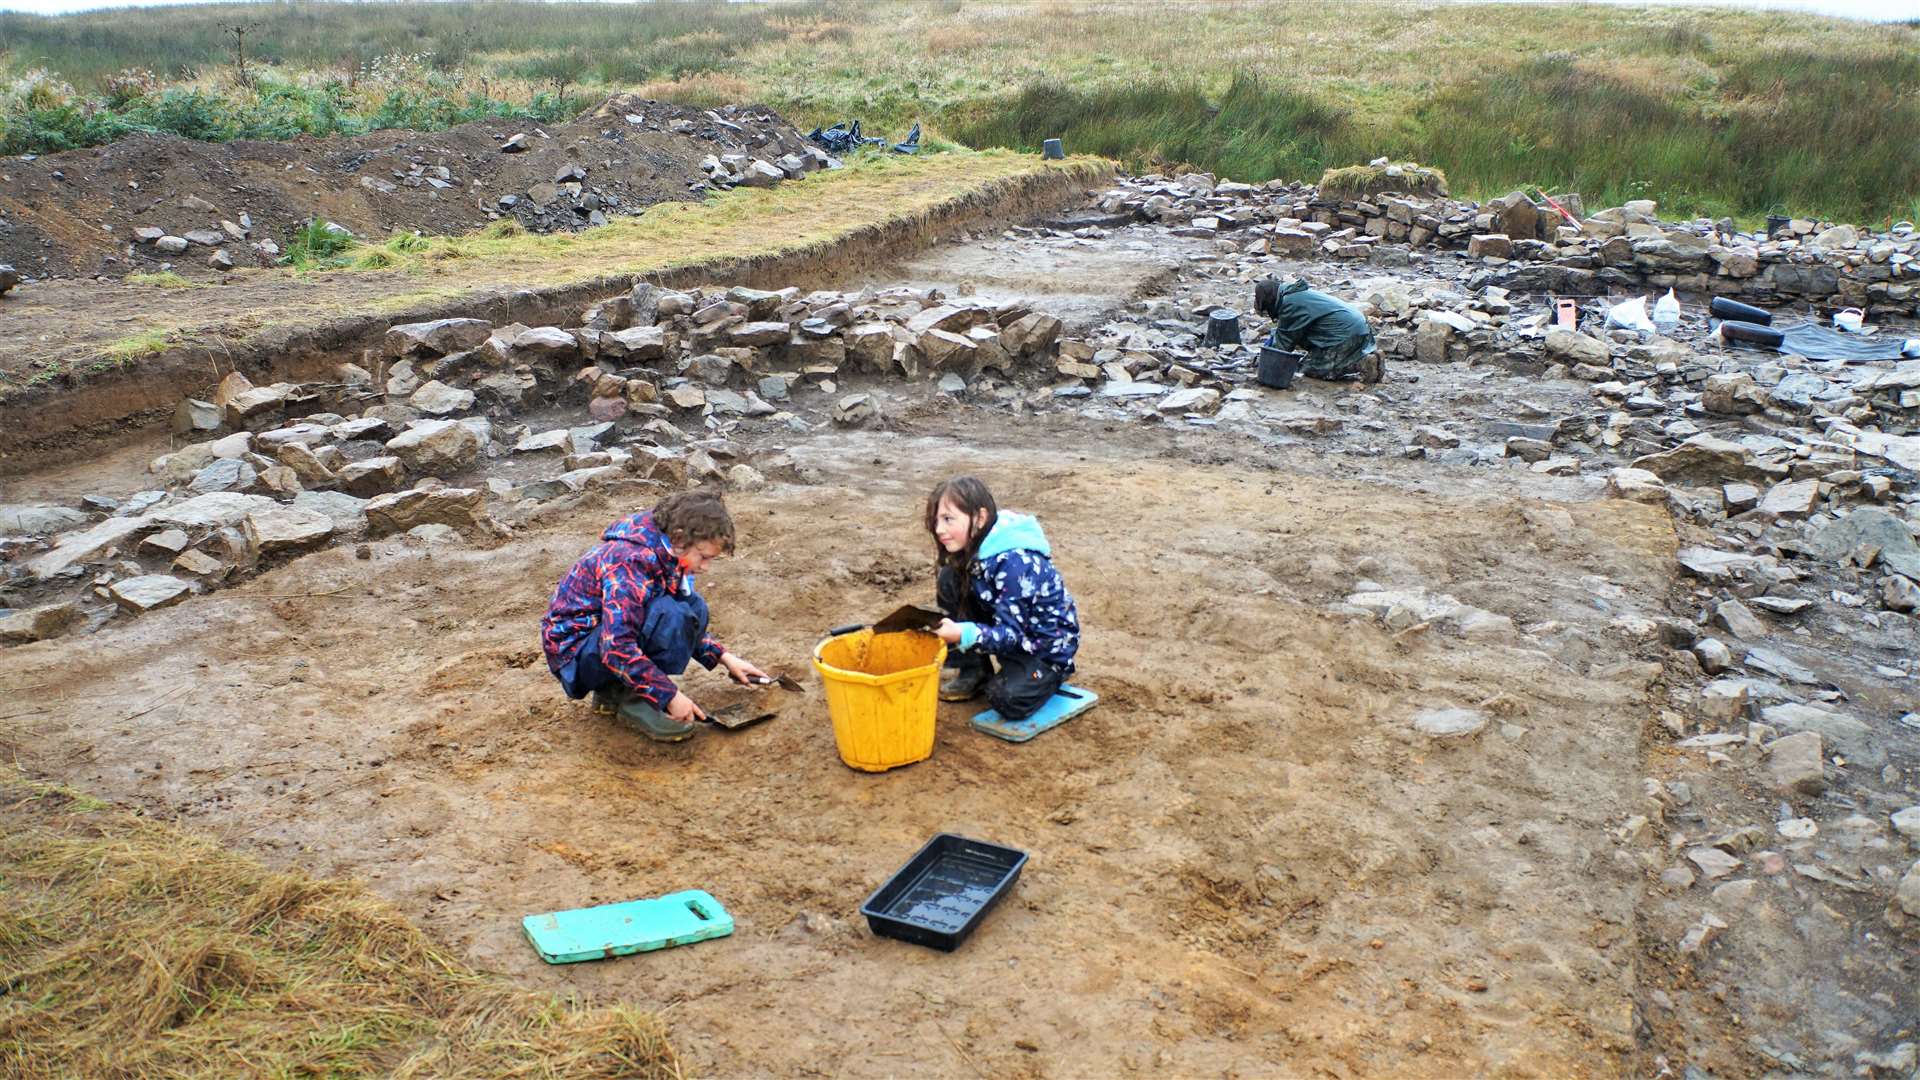 Orkney archaeologist, Martin Carruthers, had his children Luca and Amalia along to help with the dig.